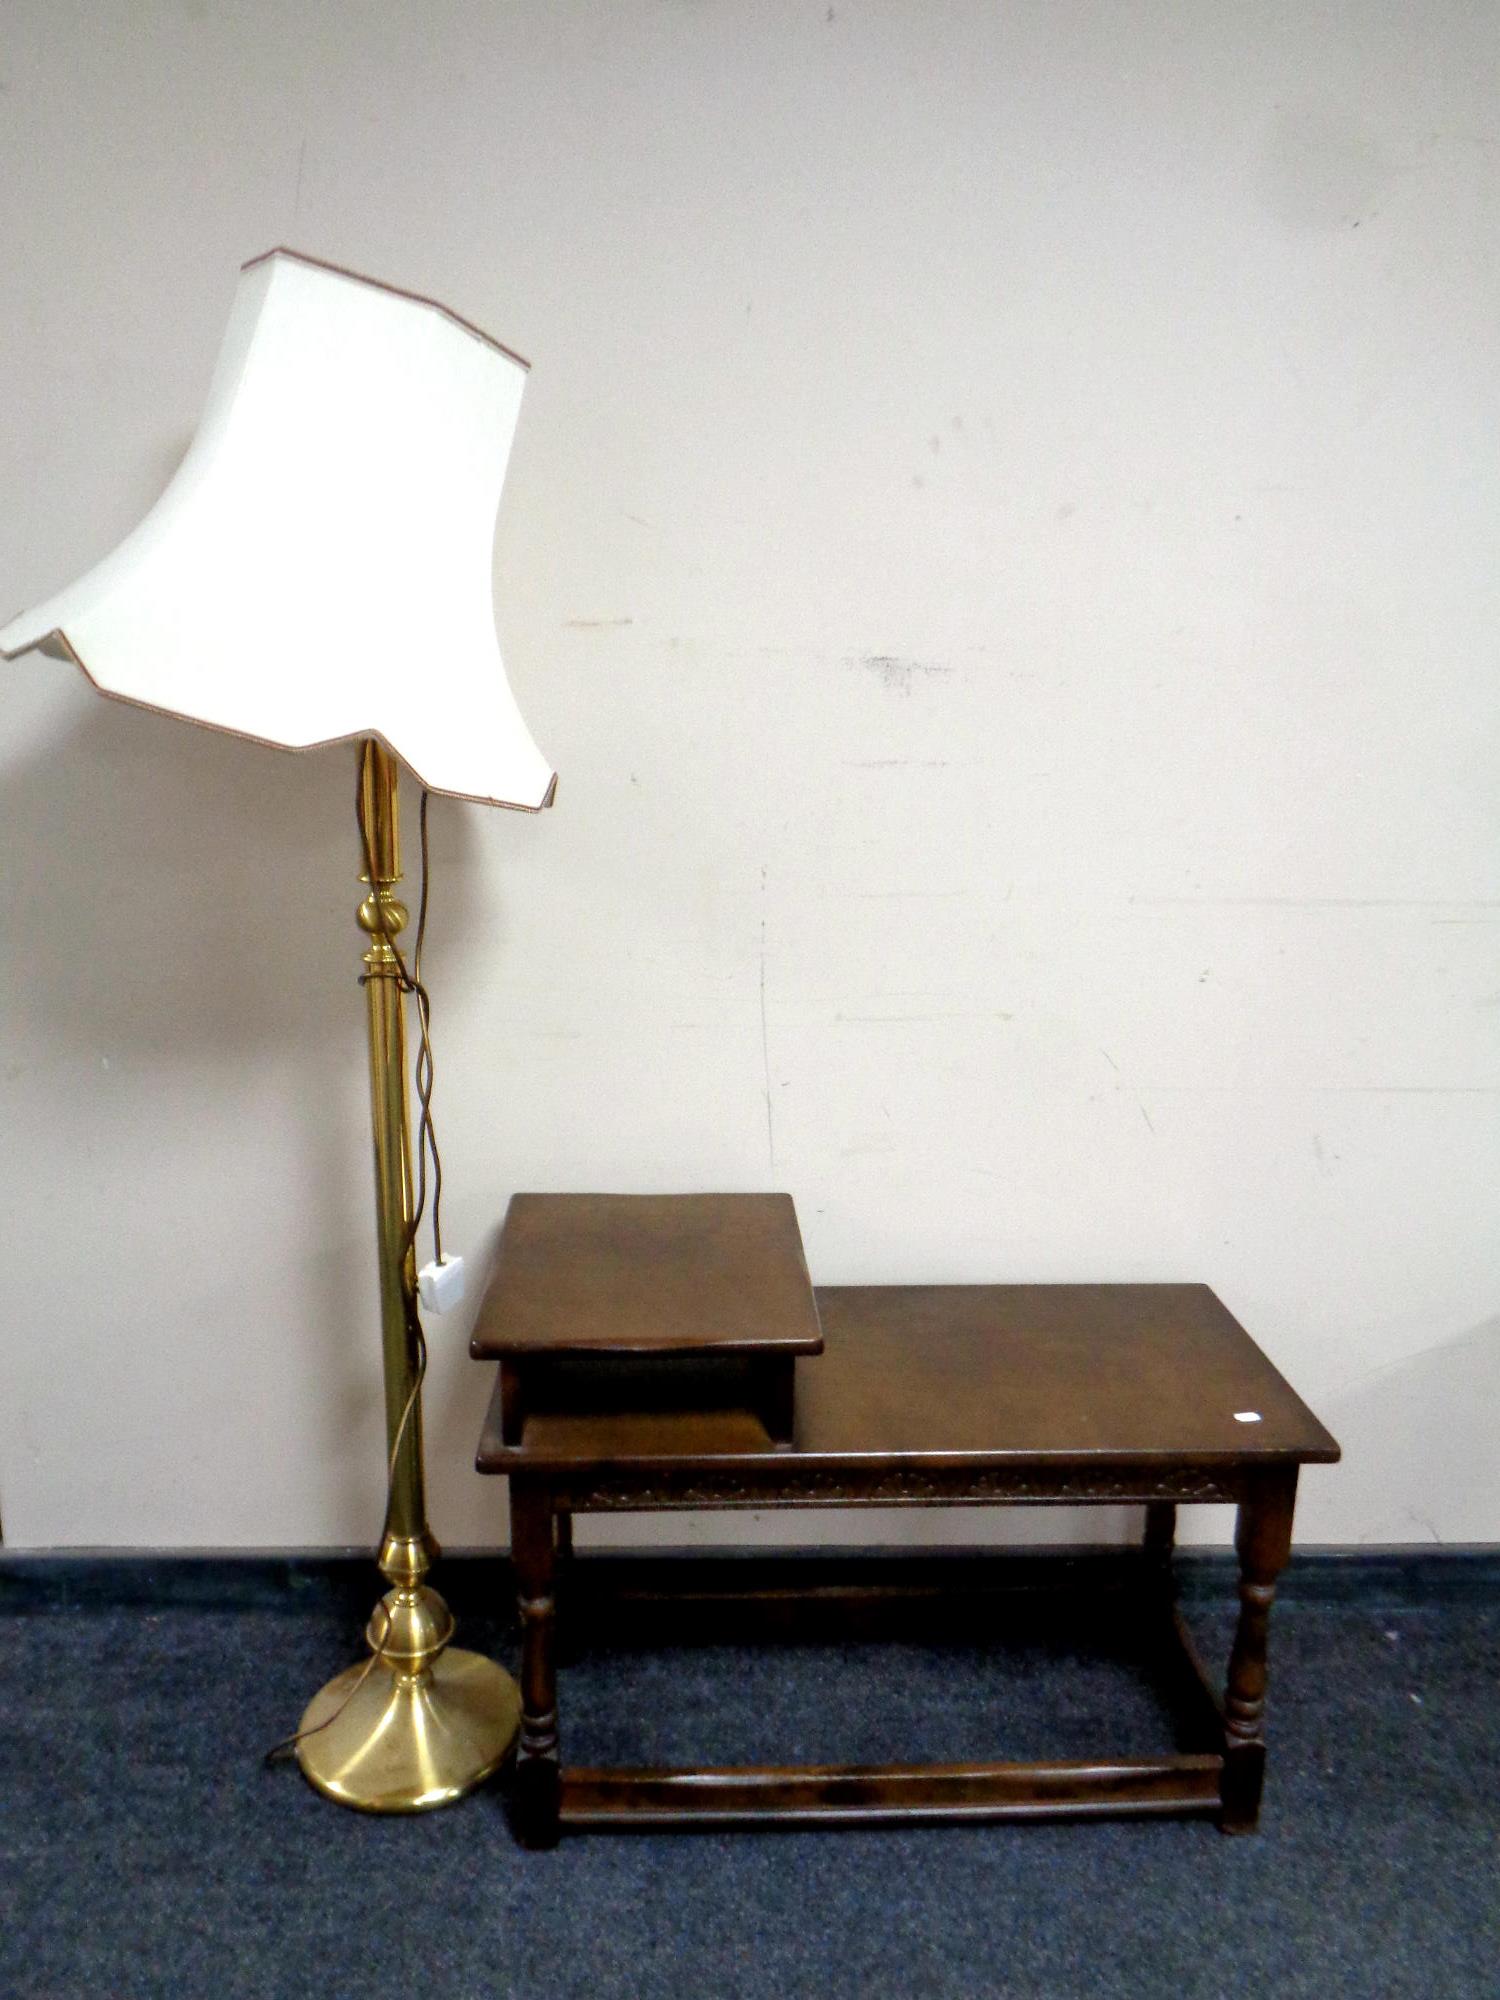 A telephone table in an oak finish together with a brass floor lamp with shade